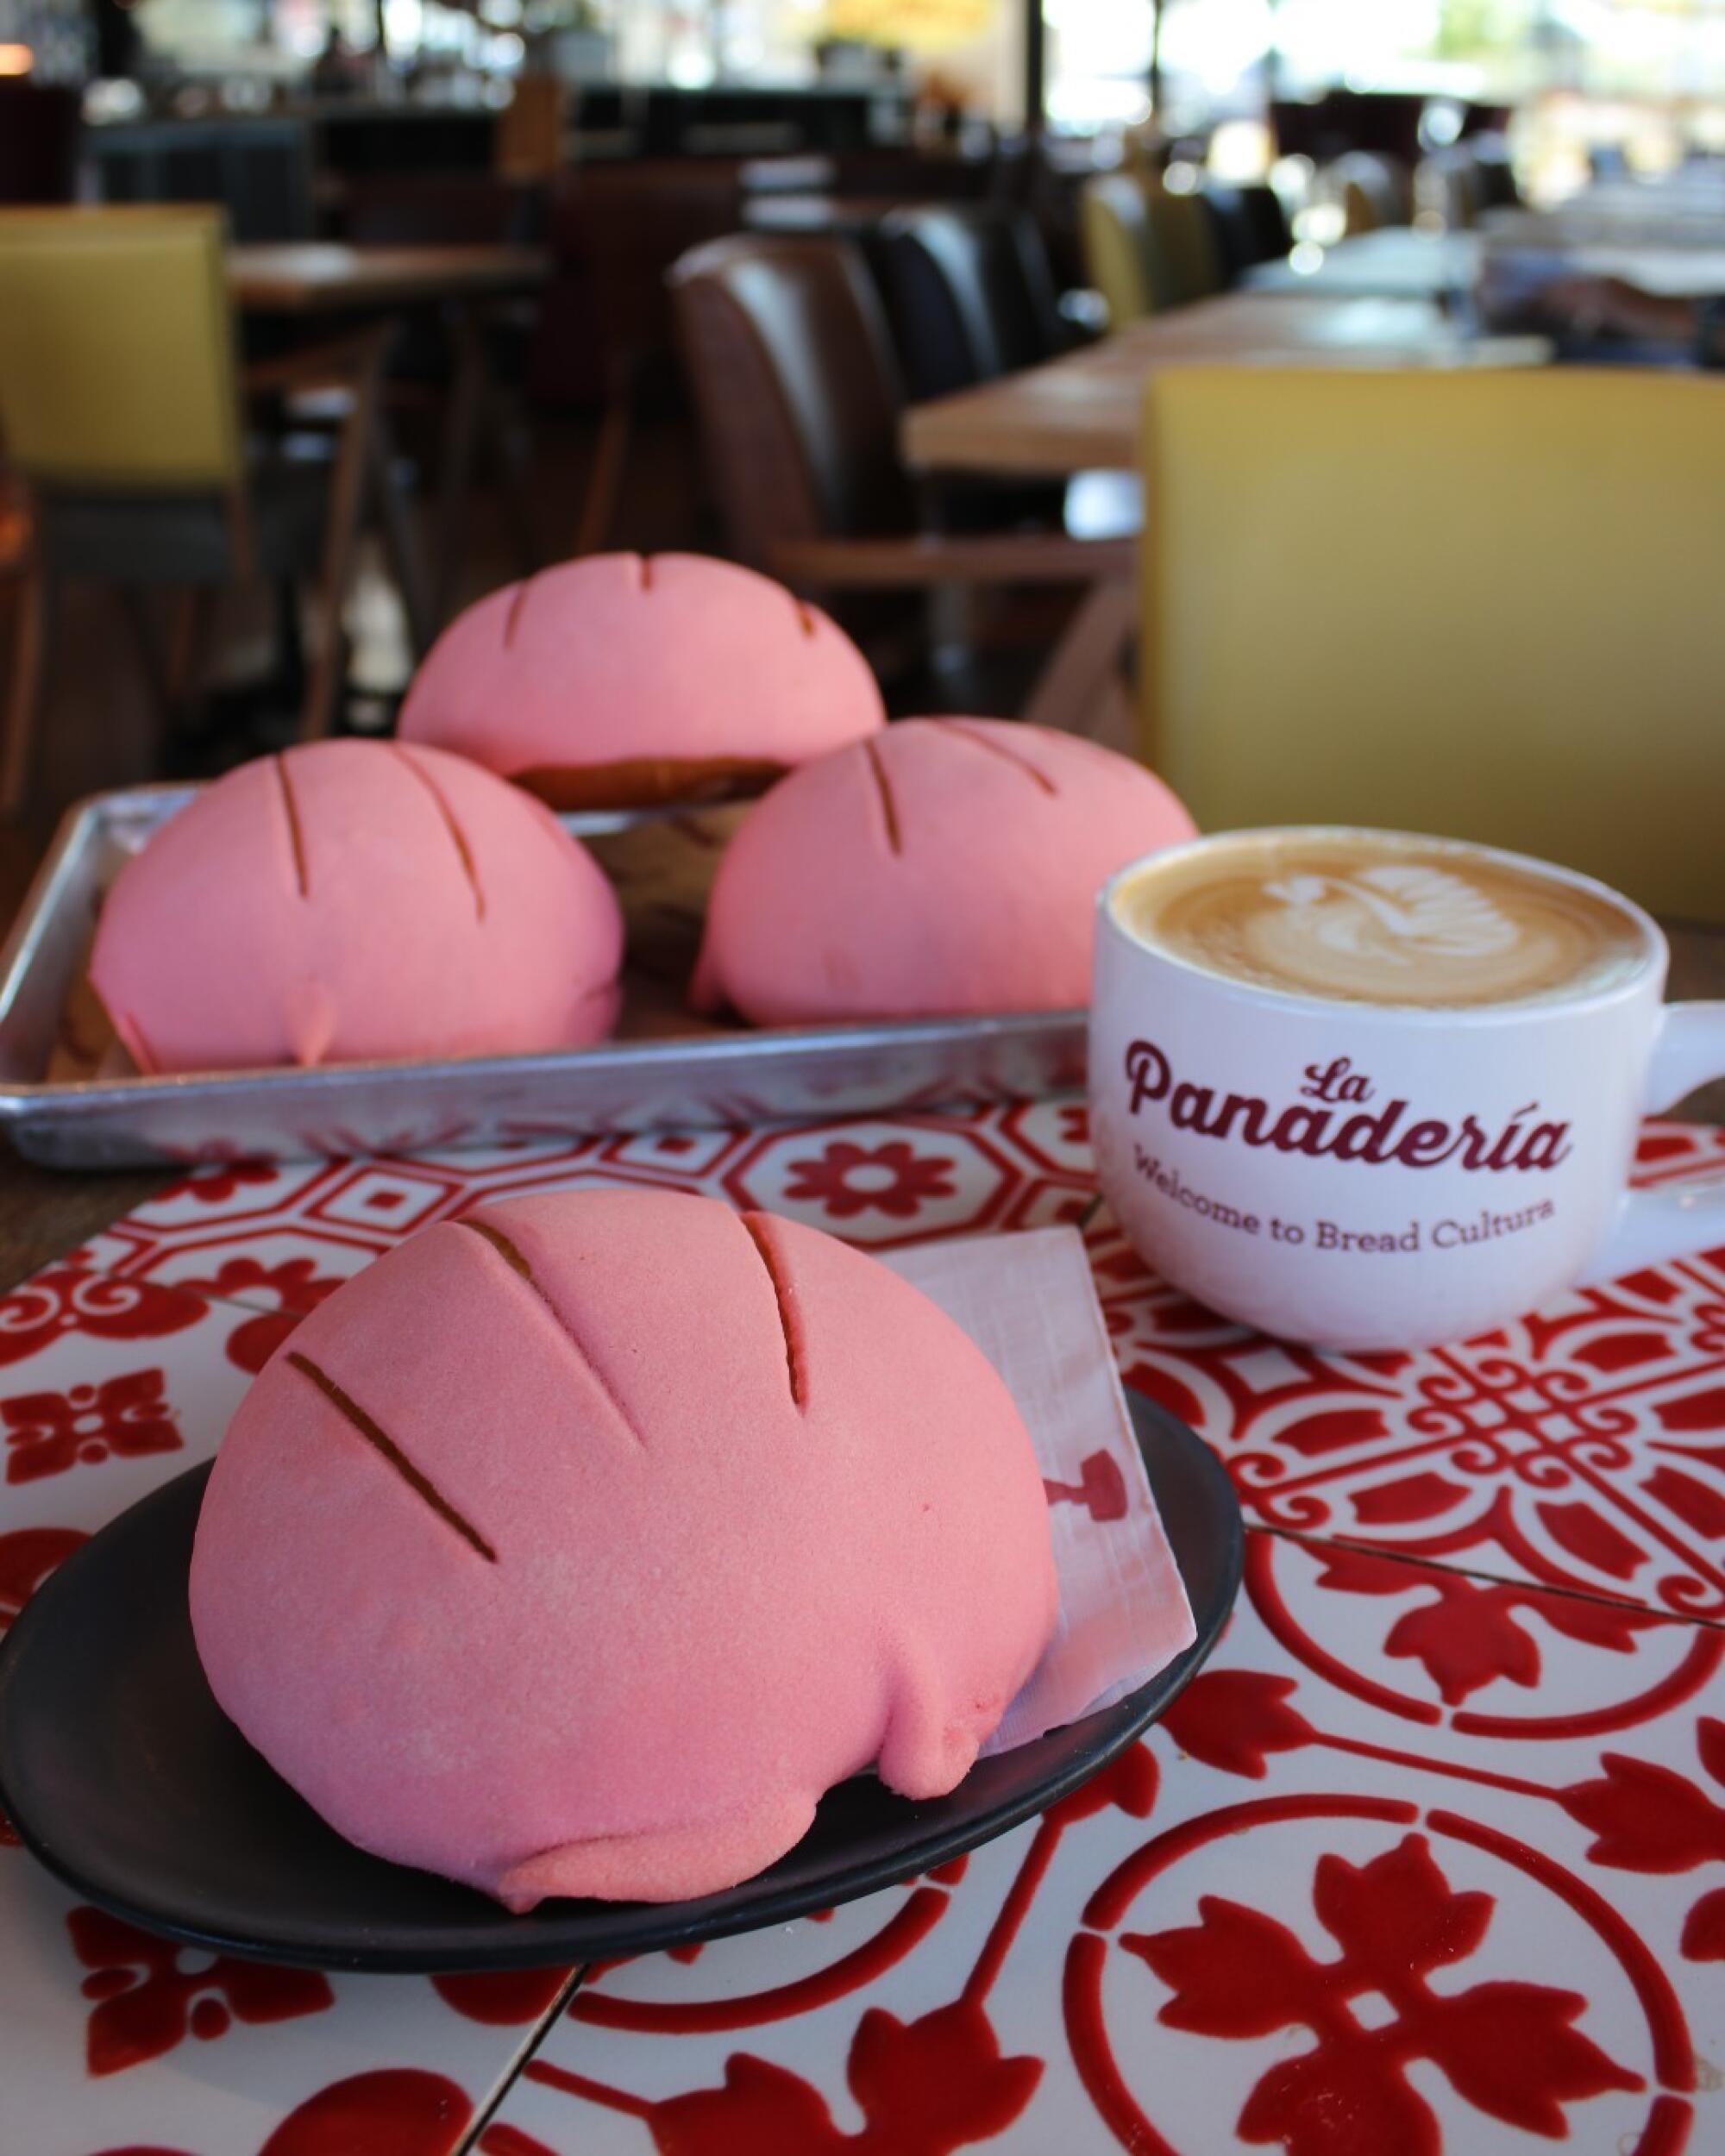 La Panaderia's ode to Barbie maintains a classic concha look.